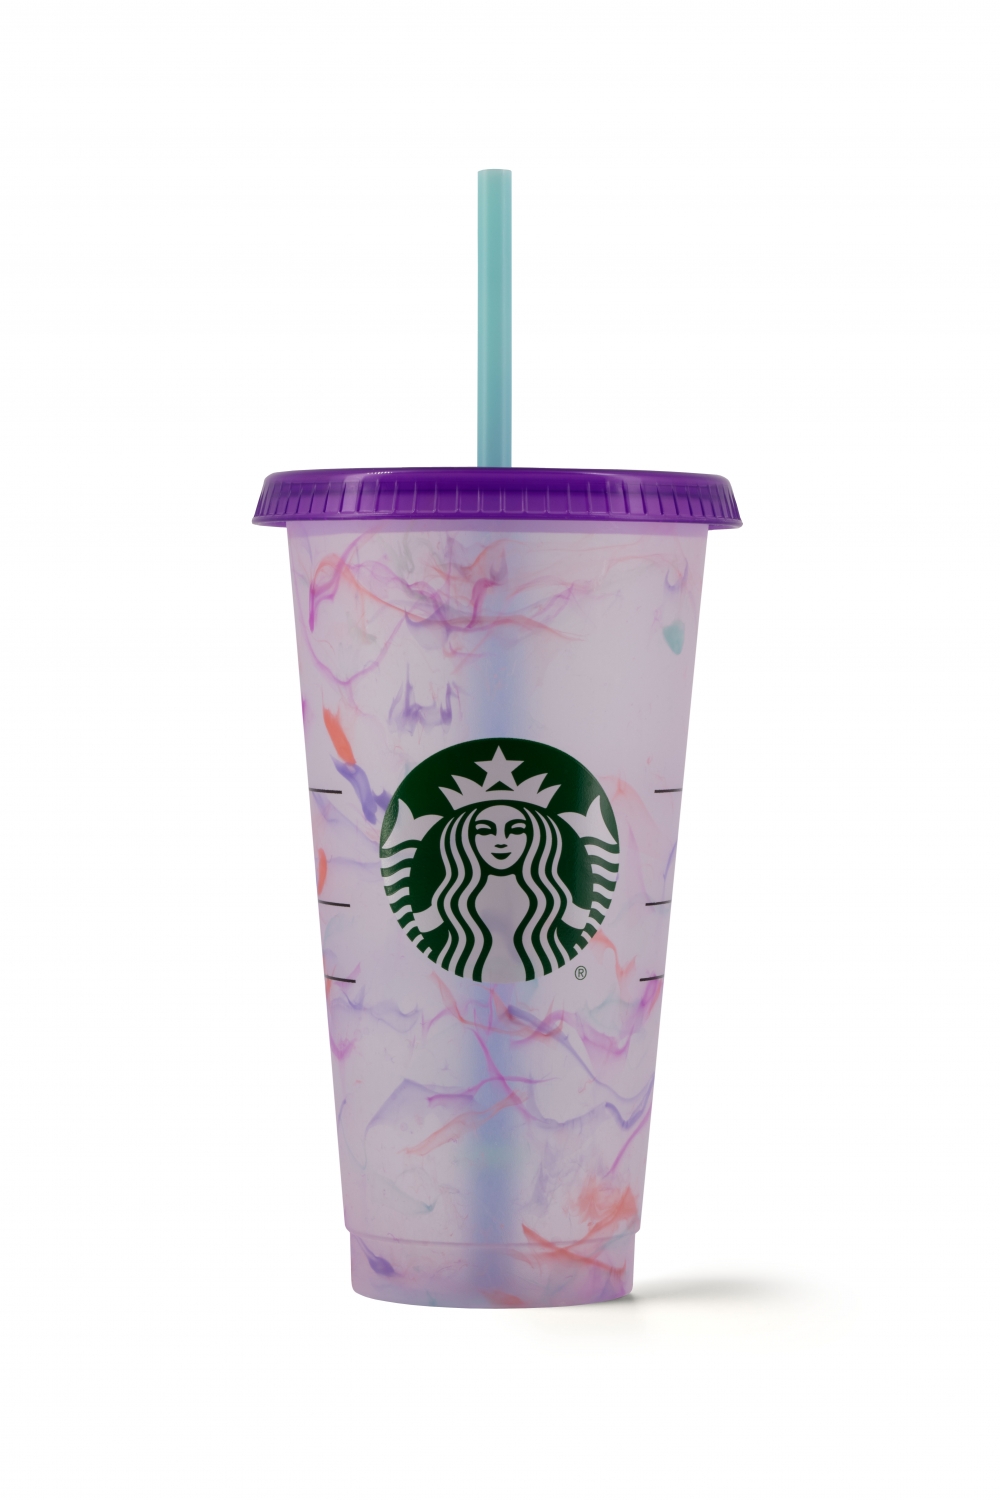 Bundle Starbucks Ban.do Sweater Weather Pink Cold Cup 24 Oz Mermaid Ornament NEW 